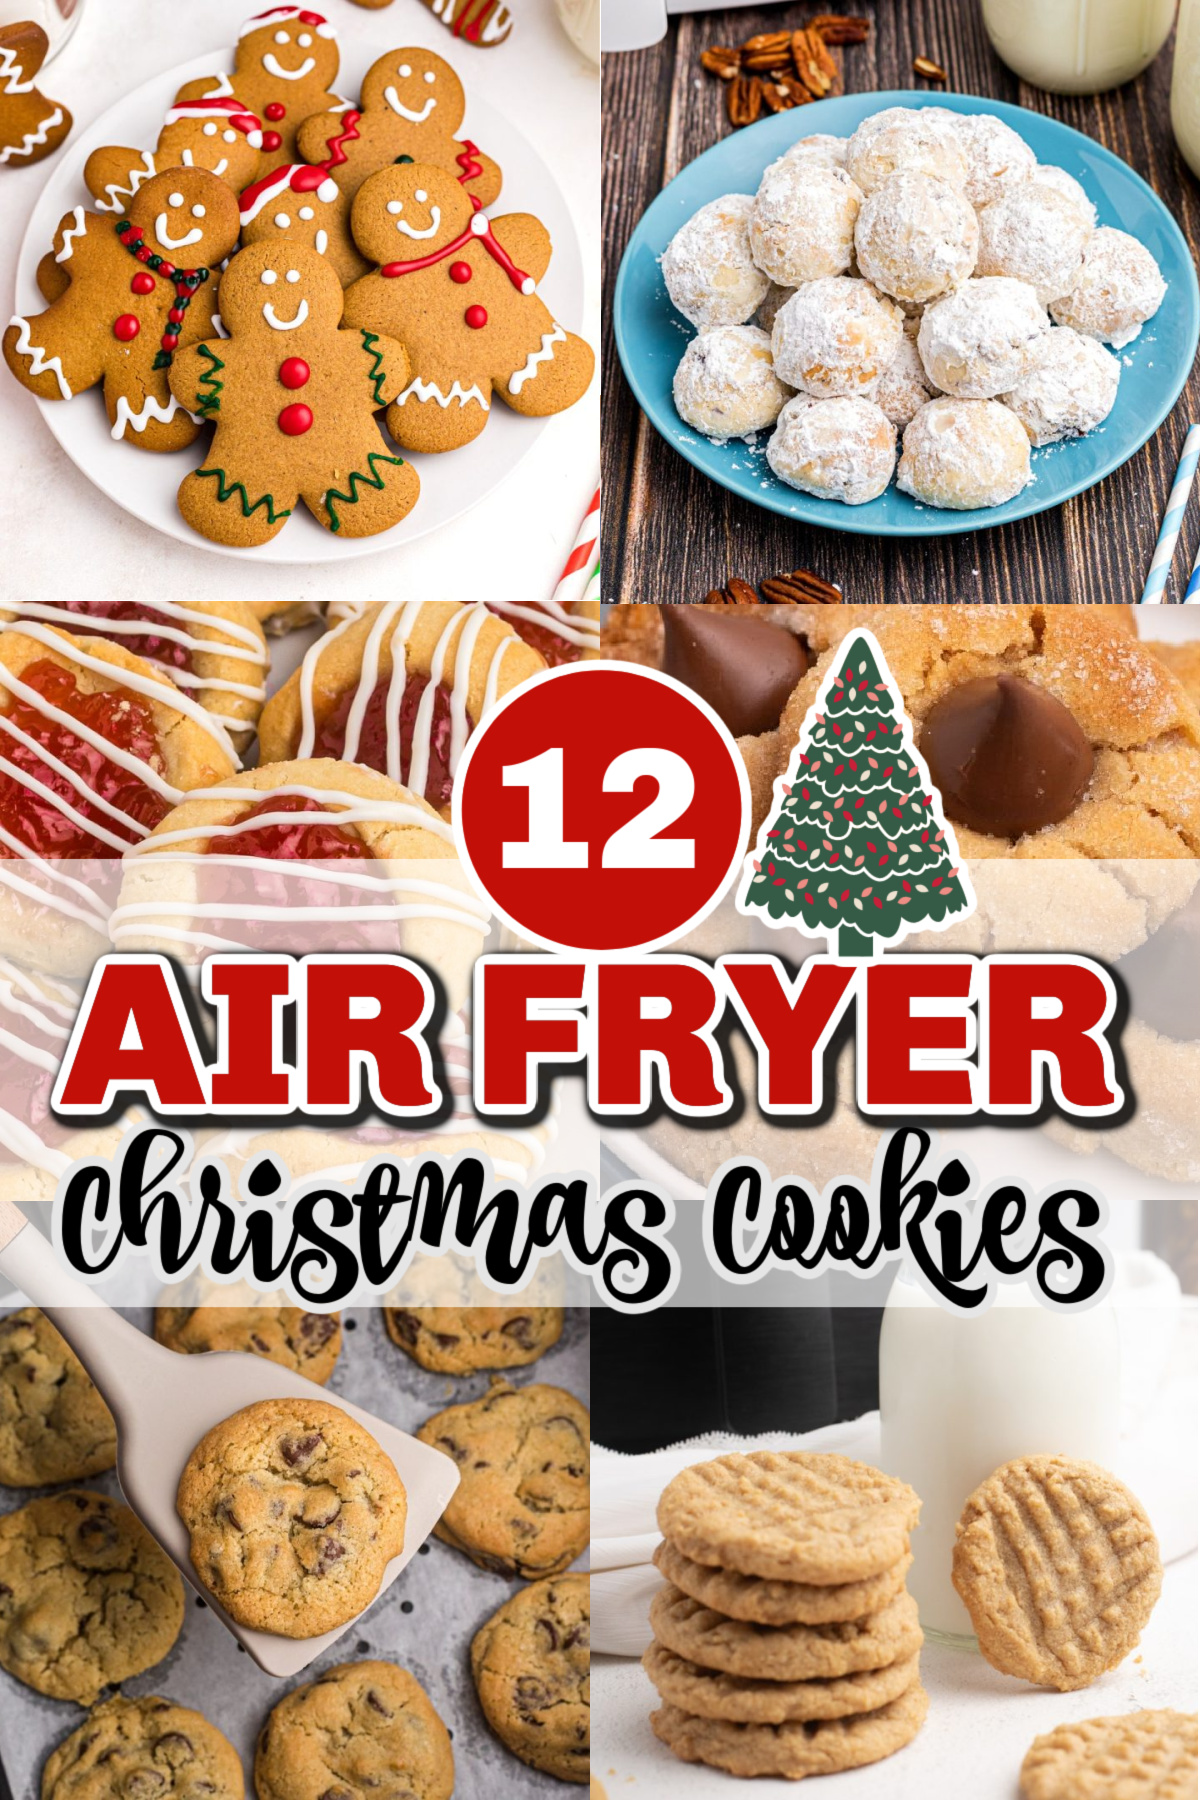 Collage of photos of Christmas cookies made in the air fryer.